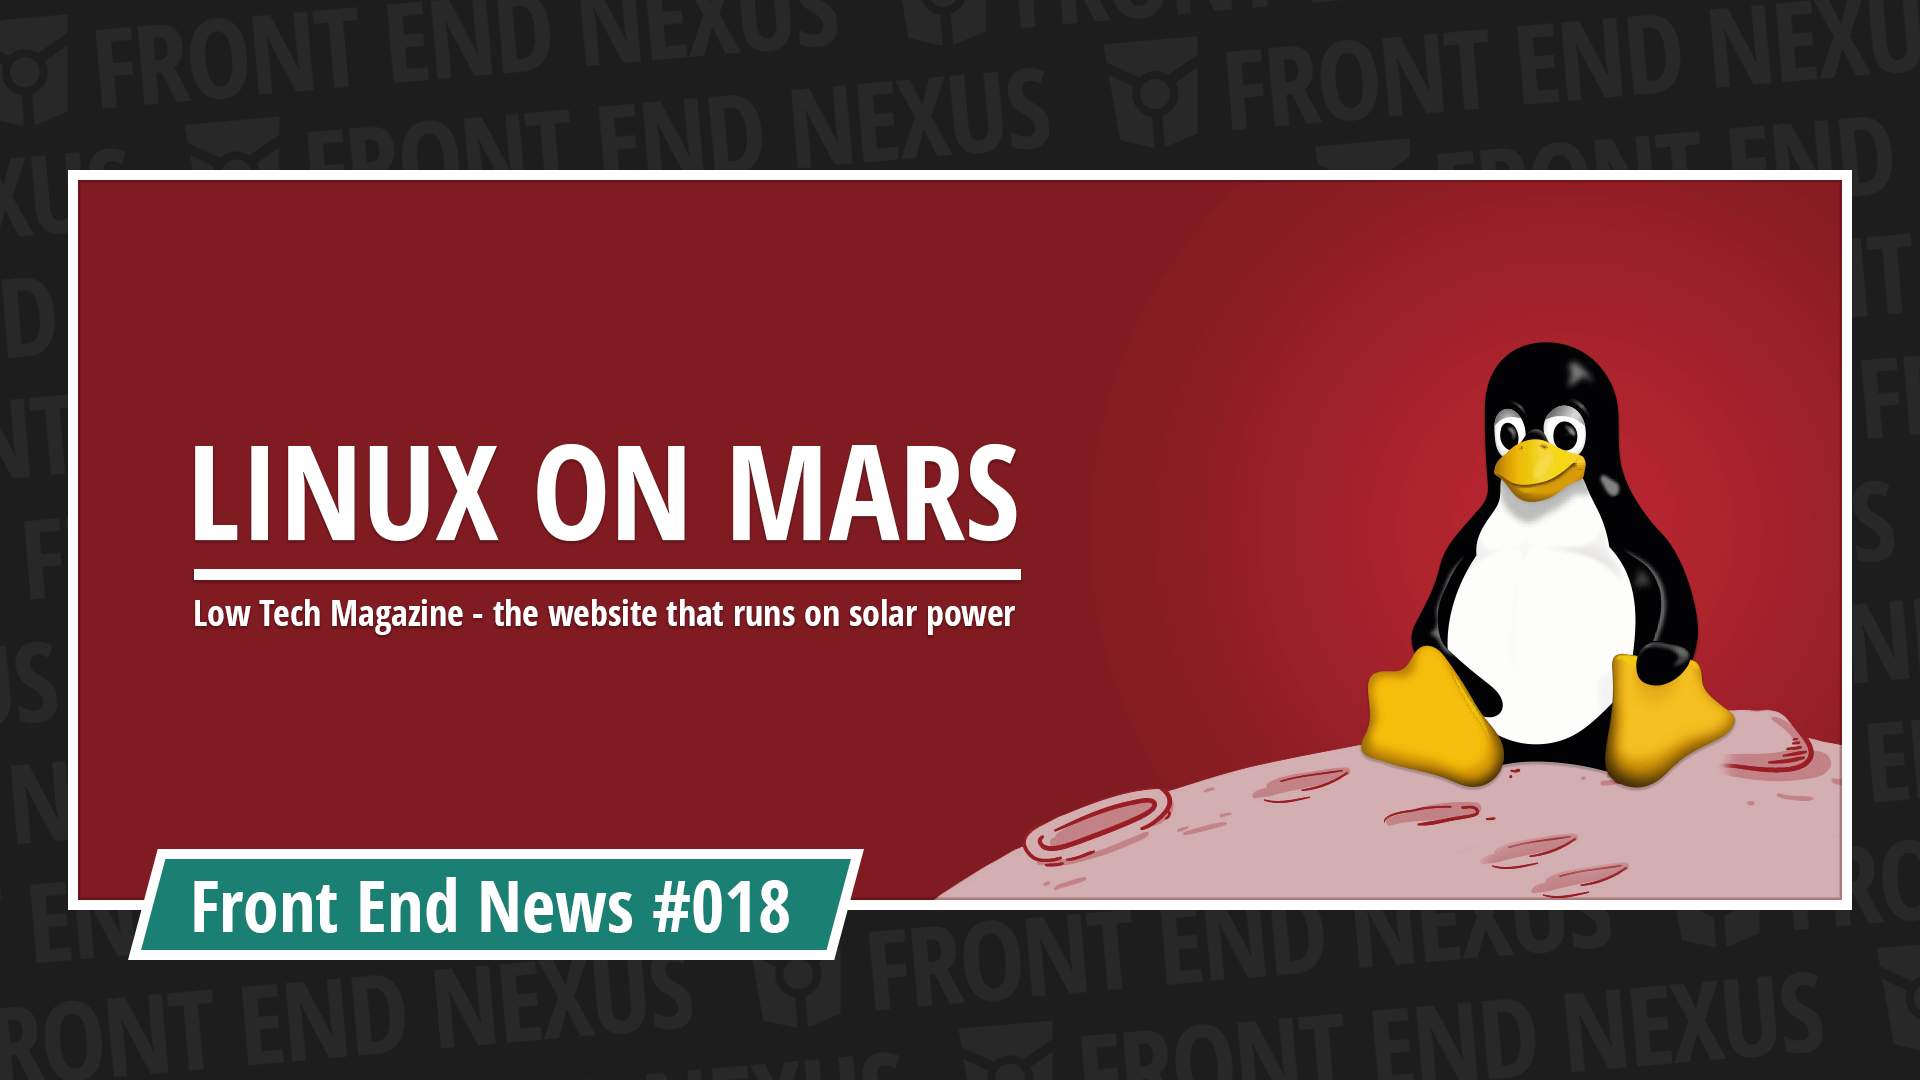 Linux drone arrives on Mars, how to run a website on solar power, and how to avoid npm substitution attacks | Front End News #018